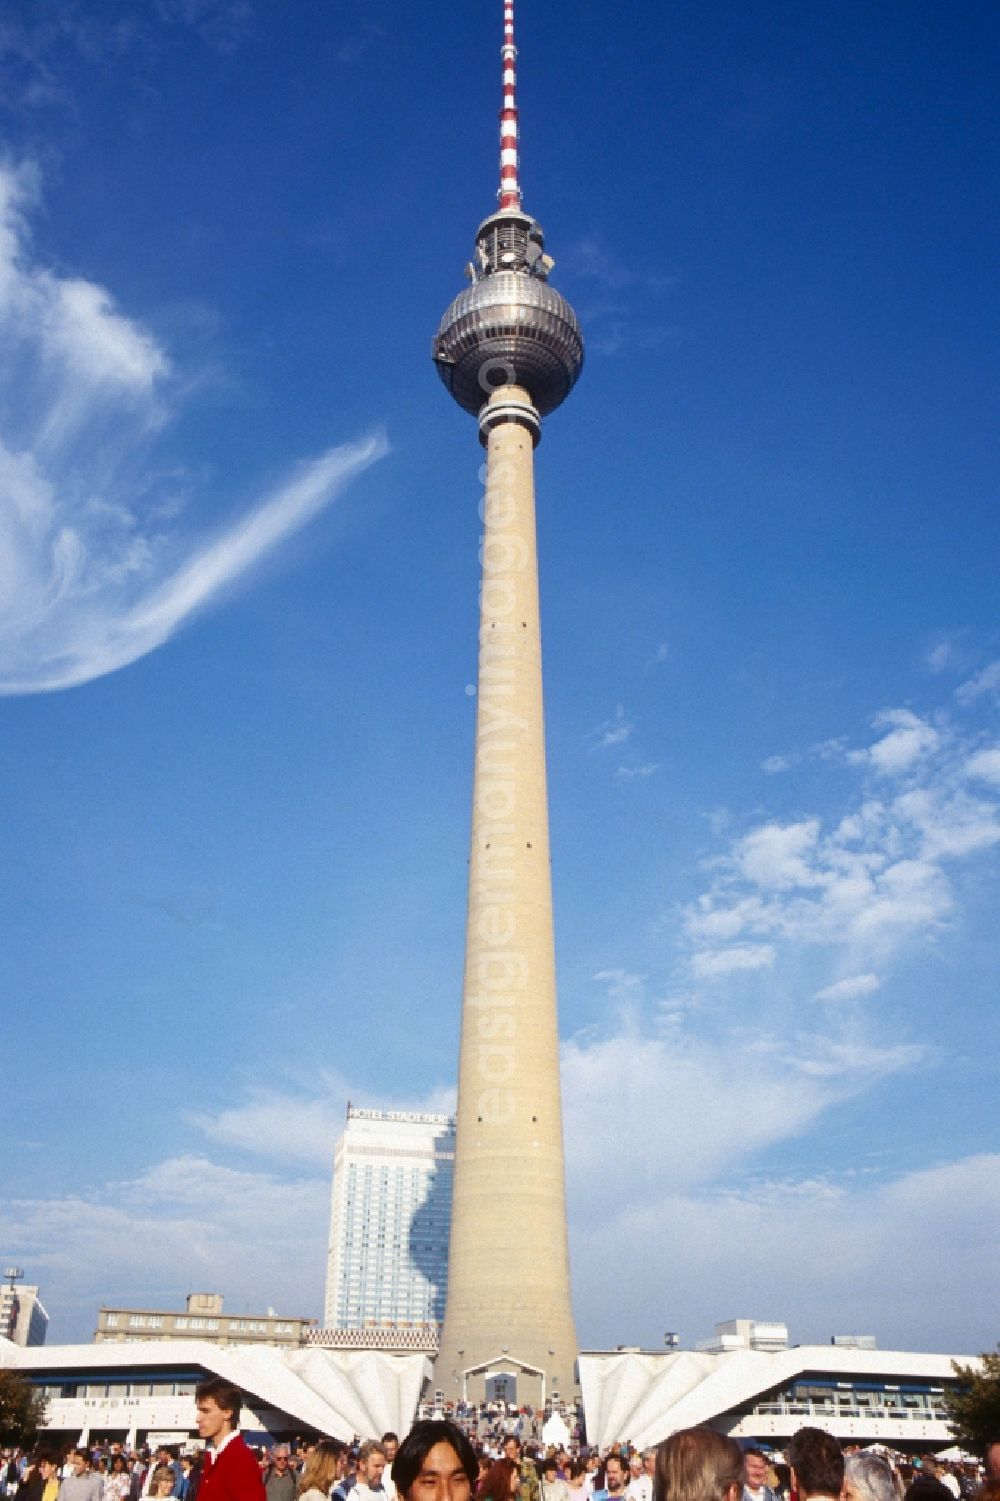 GDR photo archive: Berlin - Mitte - View of the TV Tower with the Hotel Stadt Berlin in the background in Berlin - Mitte. The Berlin TV Tower is the tallest building in Germany. As a politically simplistic ahmtes symbol of the GDR, the distinctive and influential city building has undergone a transition to the citywide icon in reunited Berlin